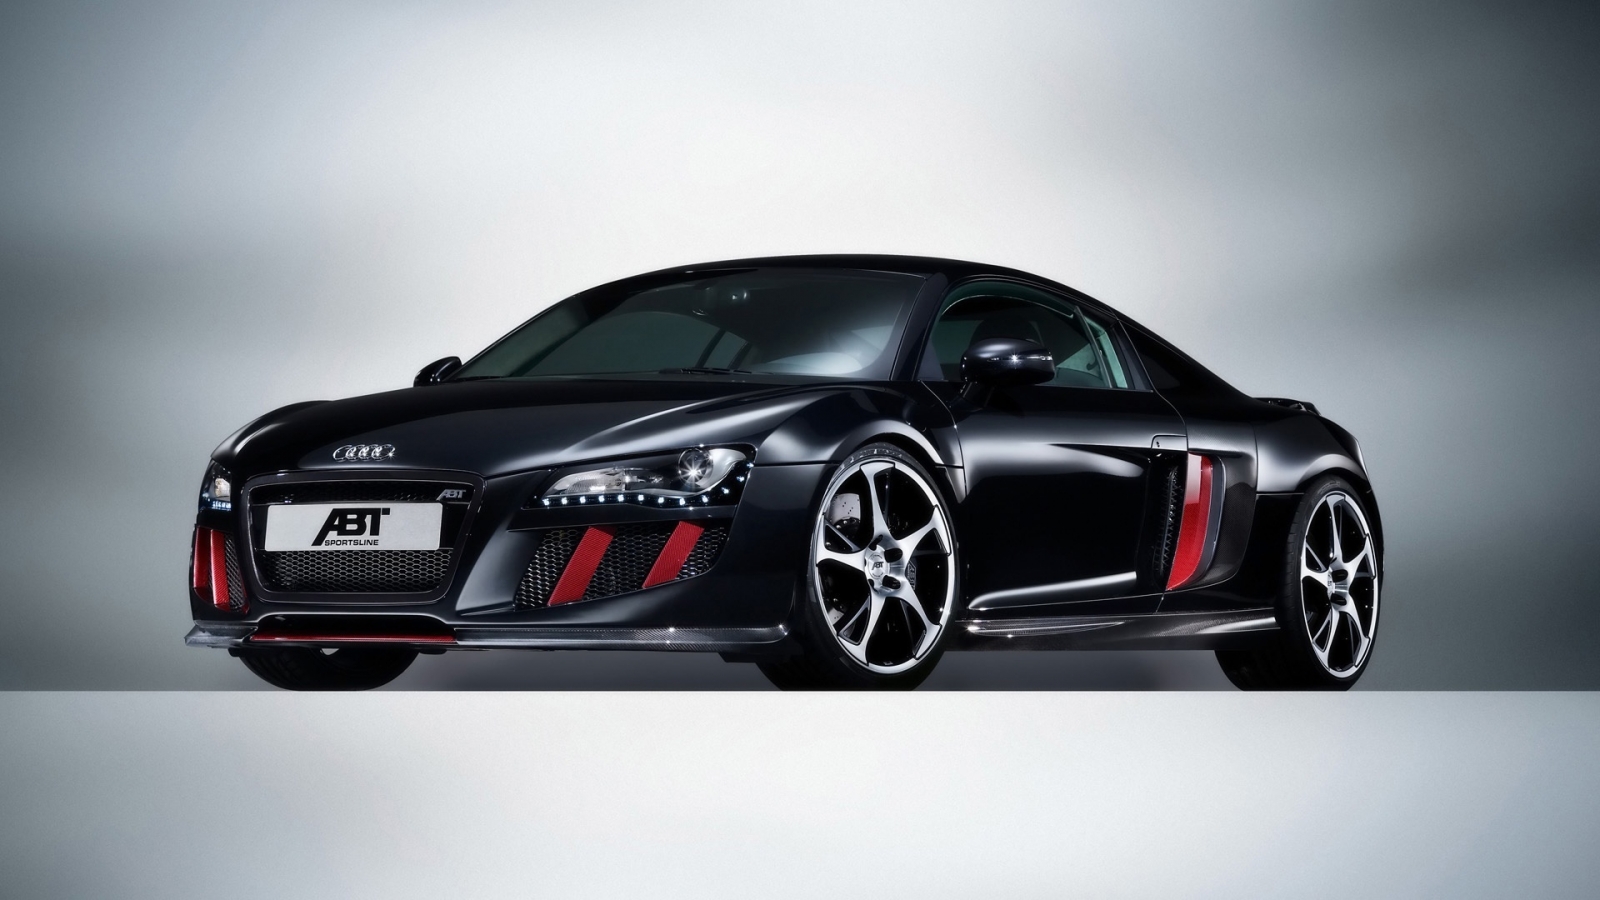 2008 Abt Audi R8 - Front Angle Lights for 1600 x 900 HDTV resolution